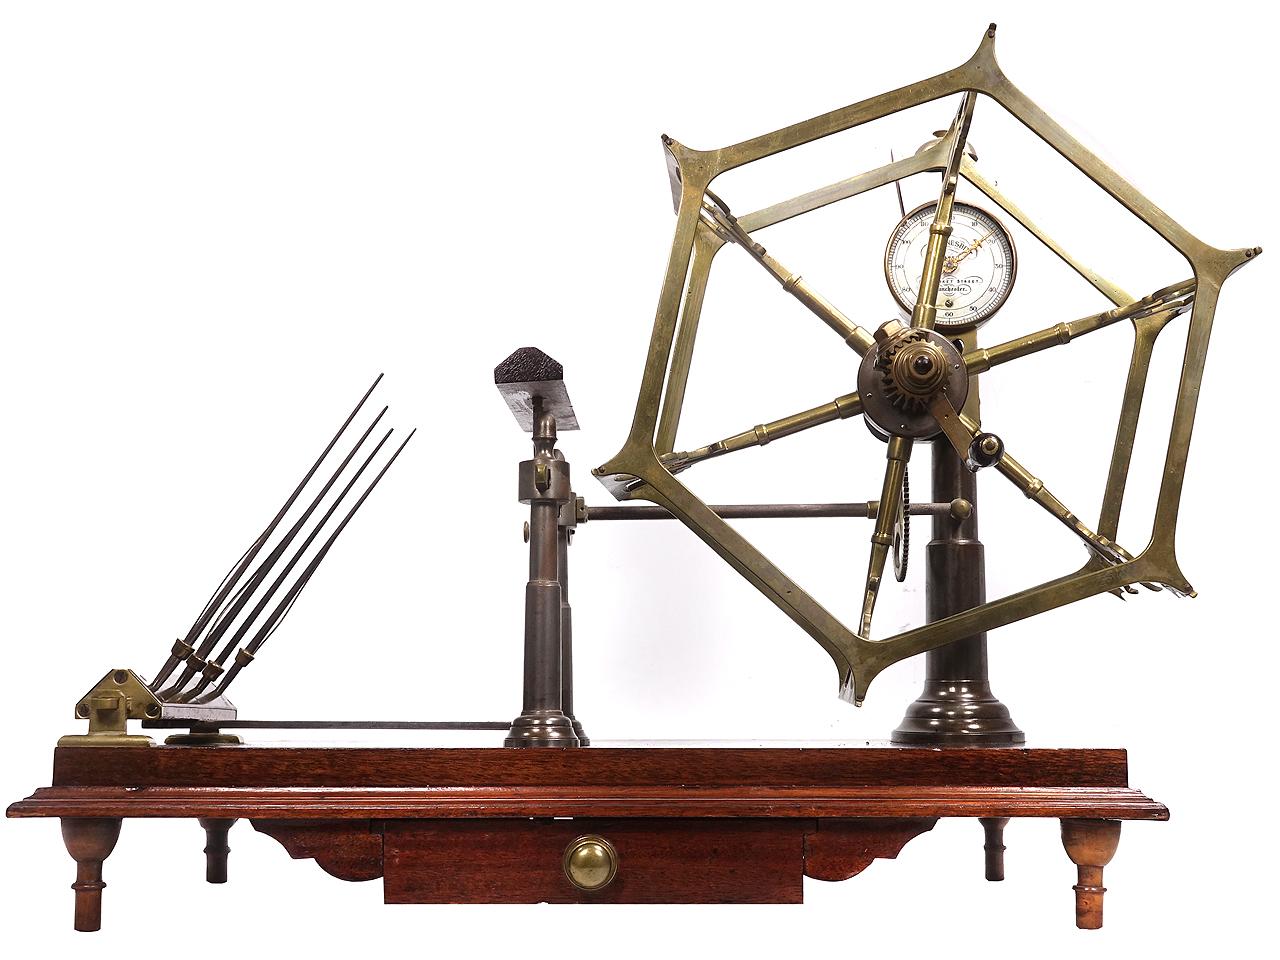 This is an elaborate and early Victorian Wool Winder. It sits on a wood platform with a single draw and turned legs. Its English made and signed... John Nesbitt Maker. The whole mechanism is solid brass with hand filed decorative details. Elaborate